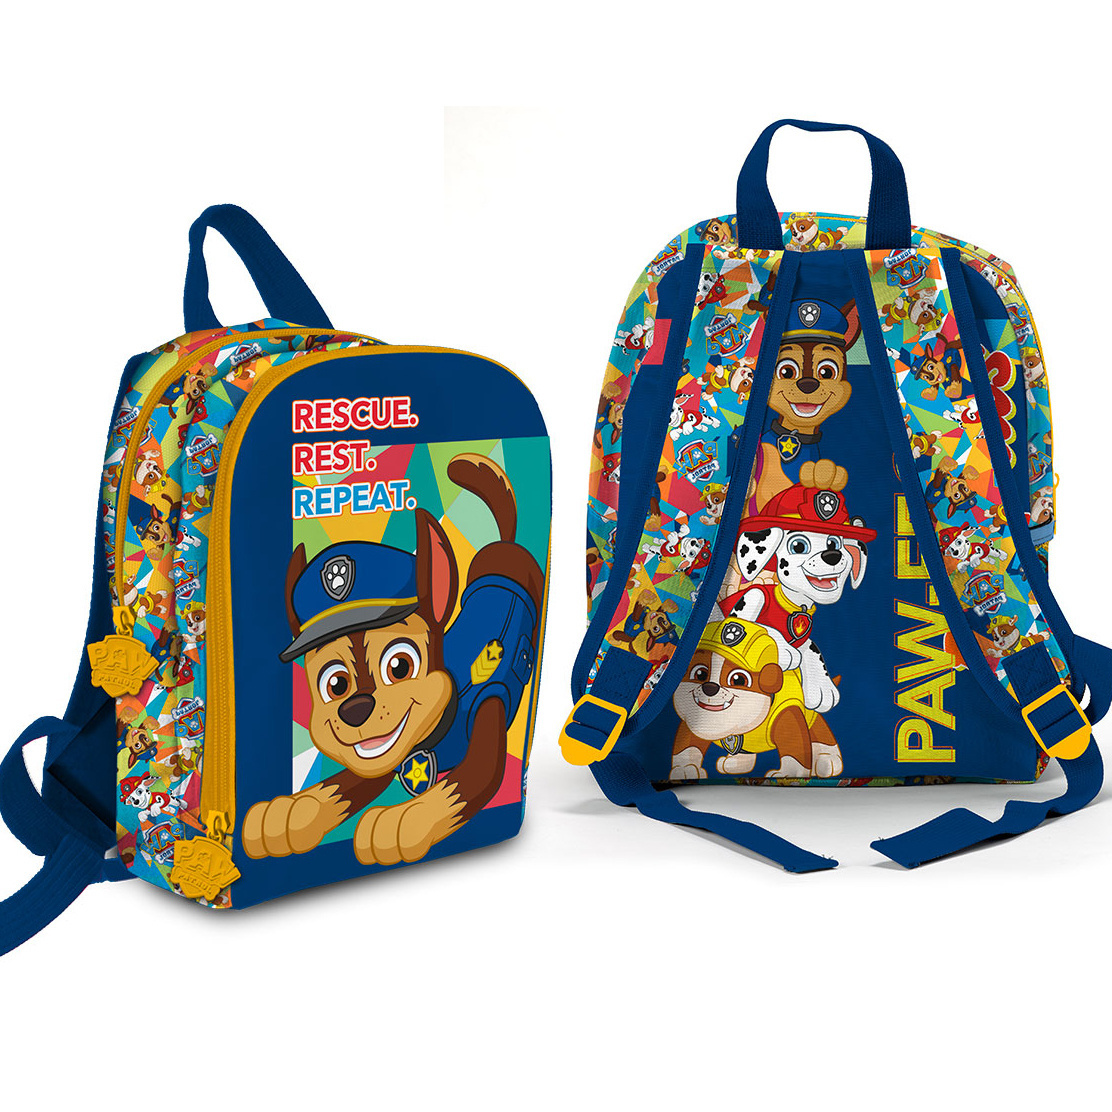 Paw Patrol Backpack Rescue - 31 x 25 x 10 cm - Polyester